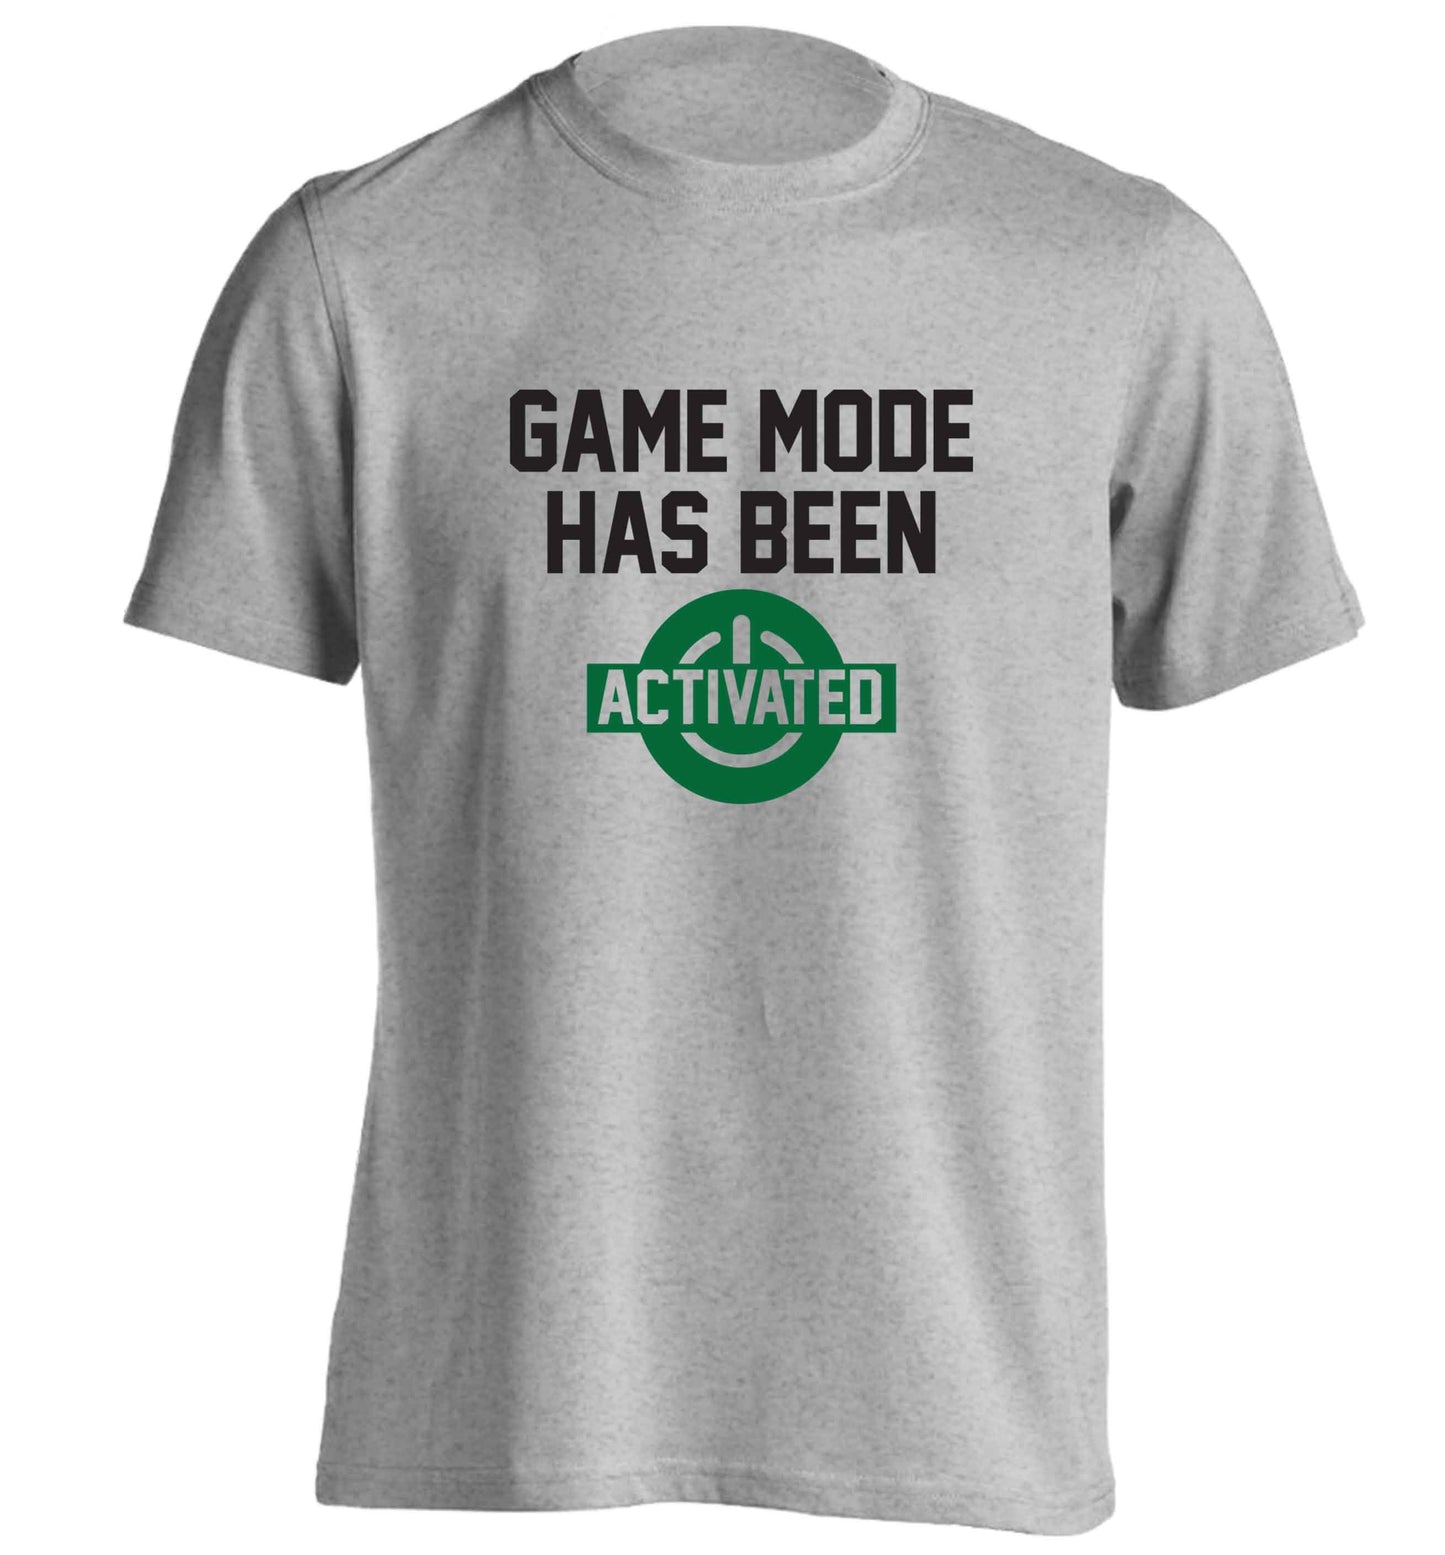 Game mode has been activated adults unisex grey Tshirt 2XL